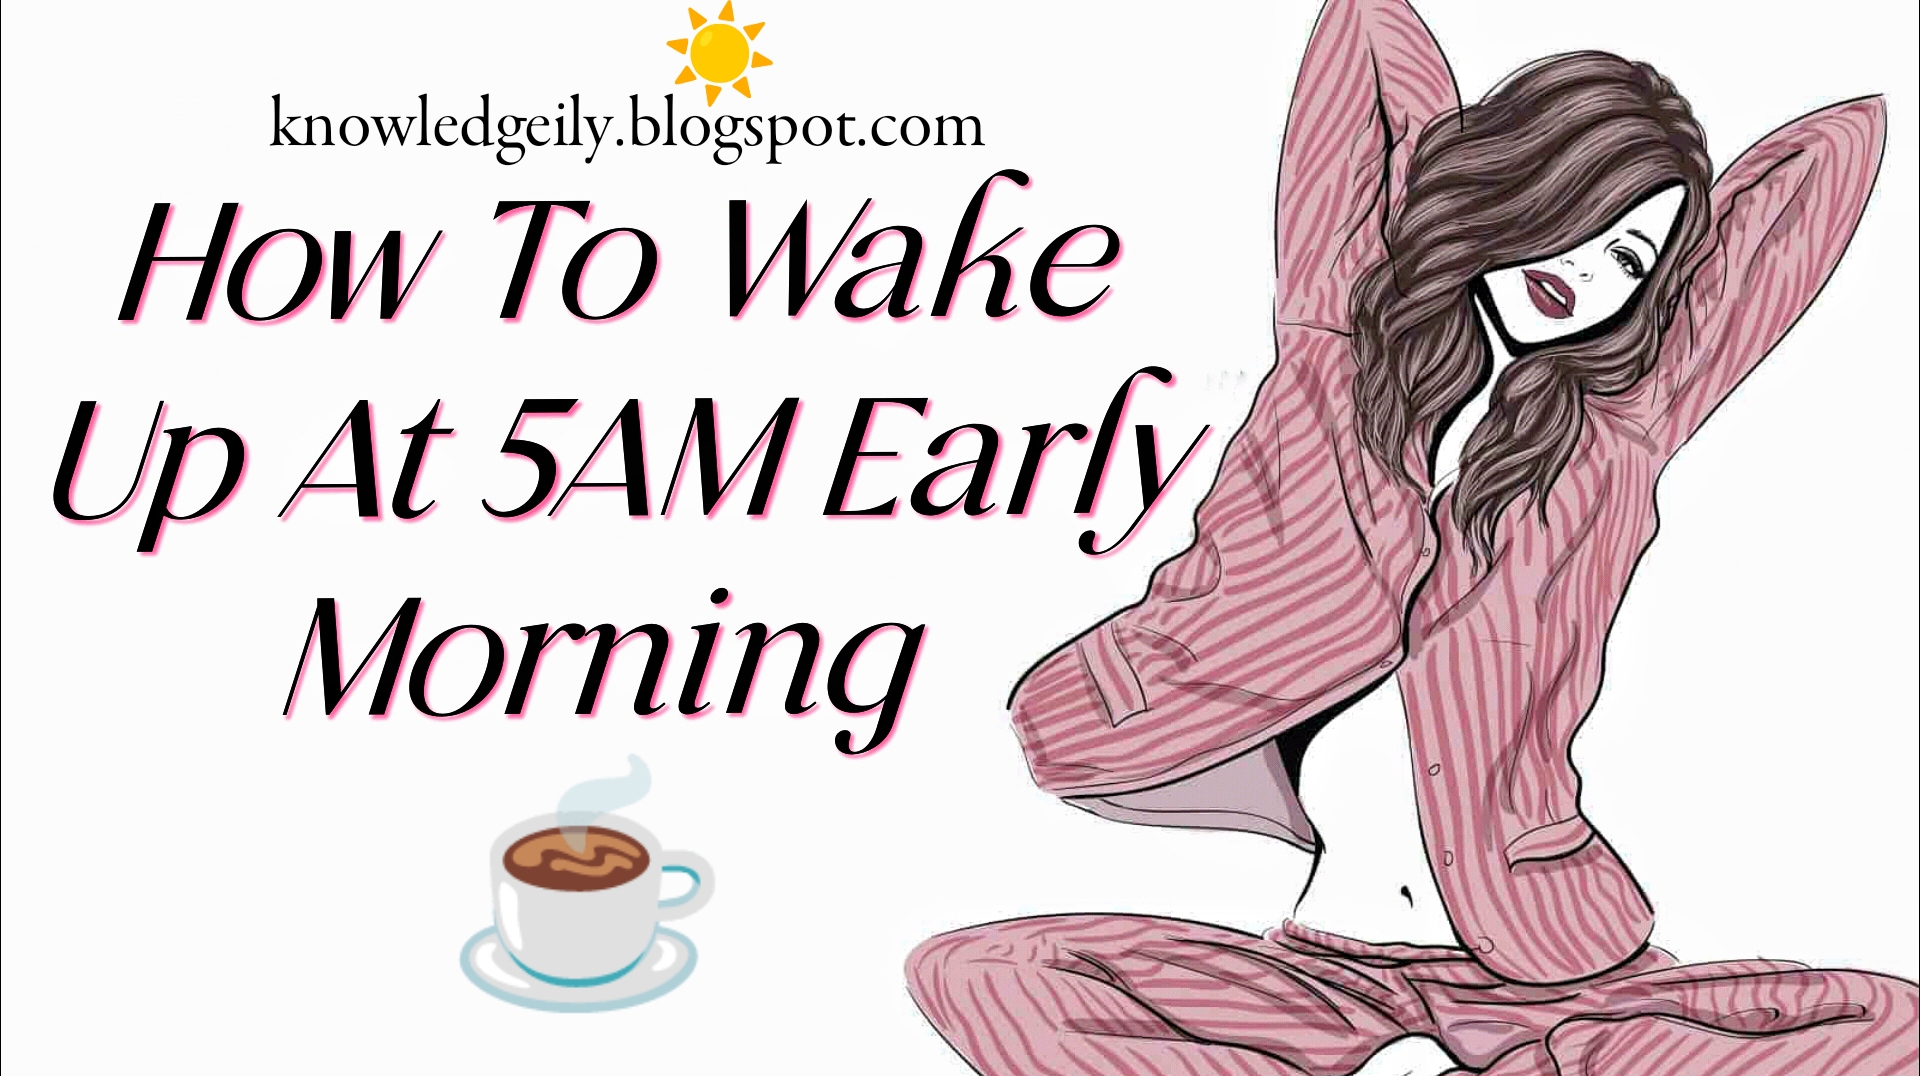 How to wake up early morning